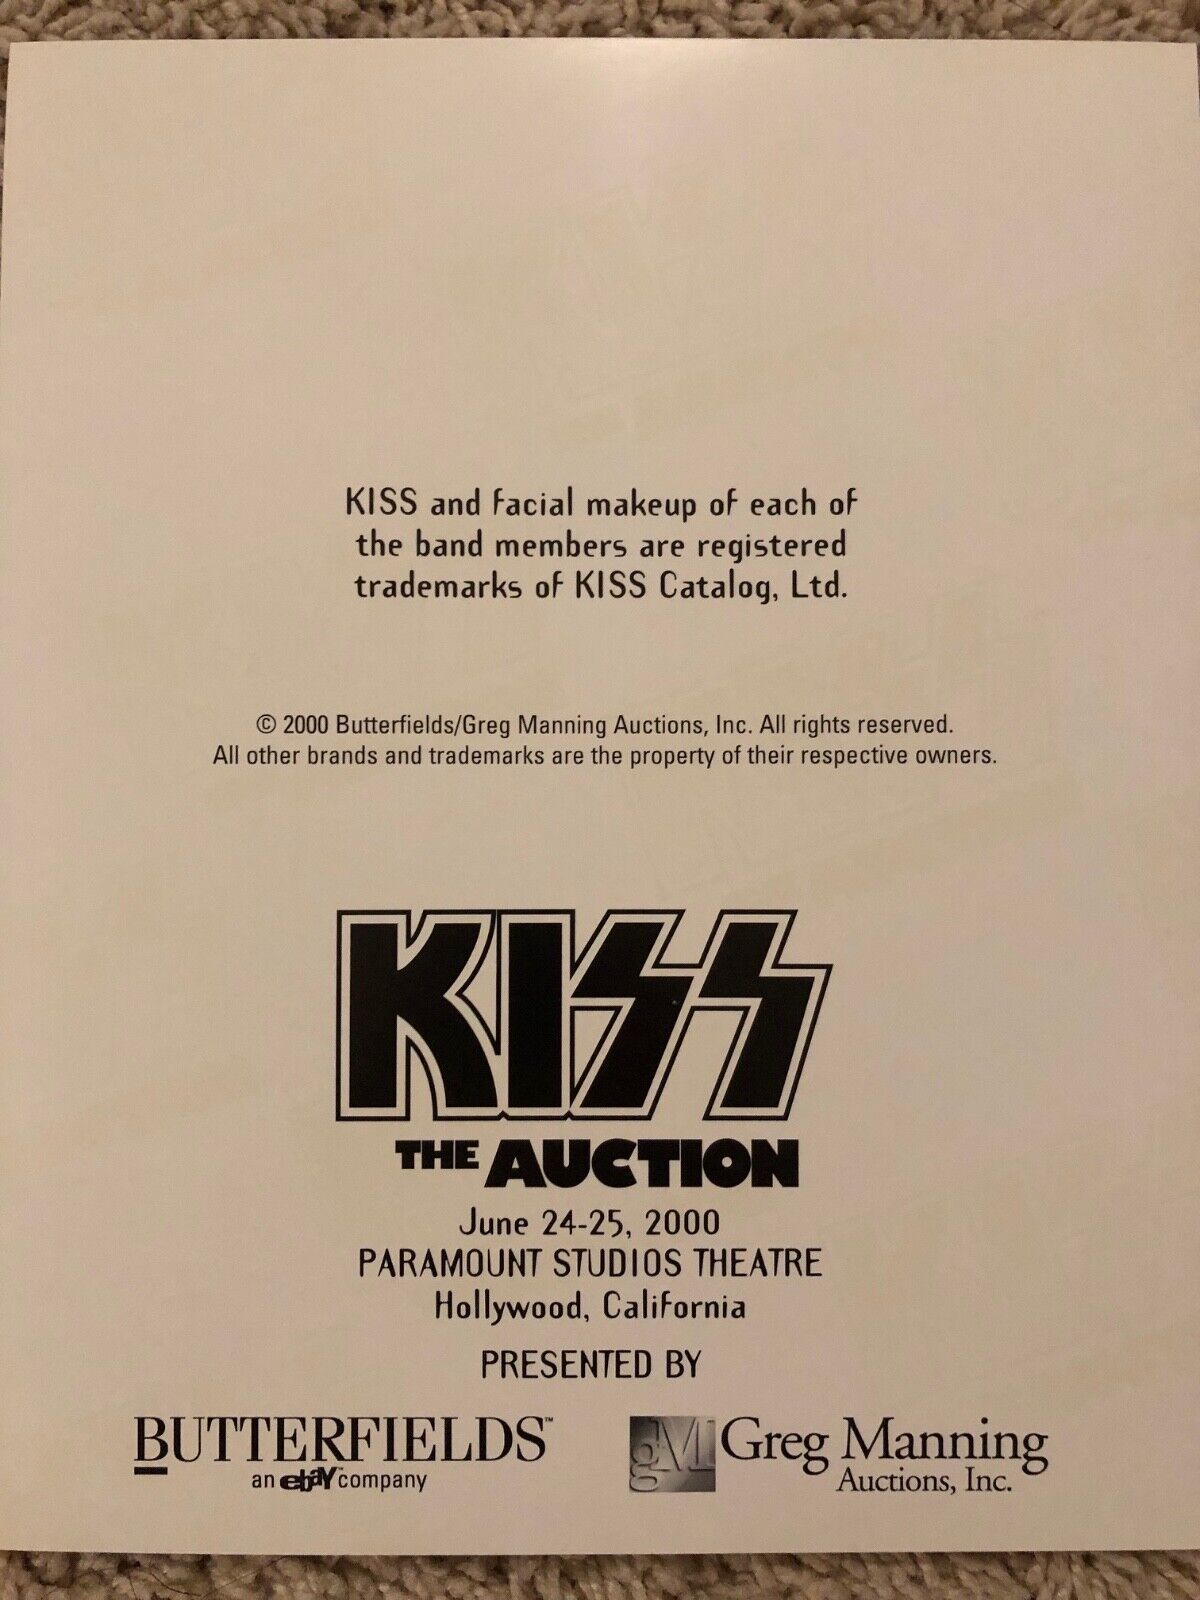 KISS individual photo signed by Gene Simmons and Paul Stanle (4 pictures) JSA Без бренда - фотография #9